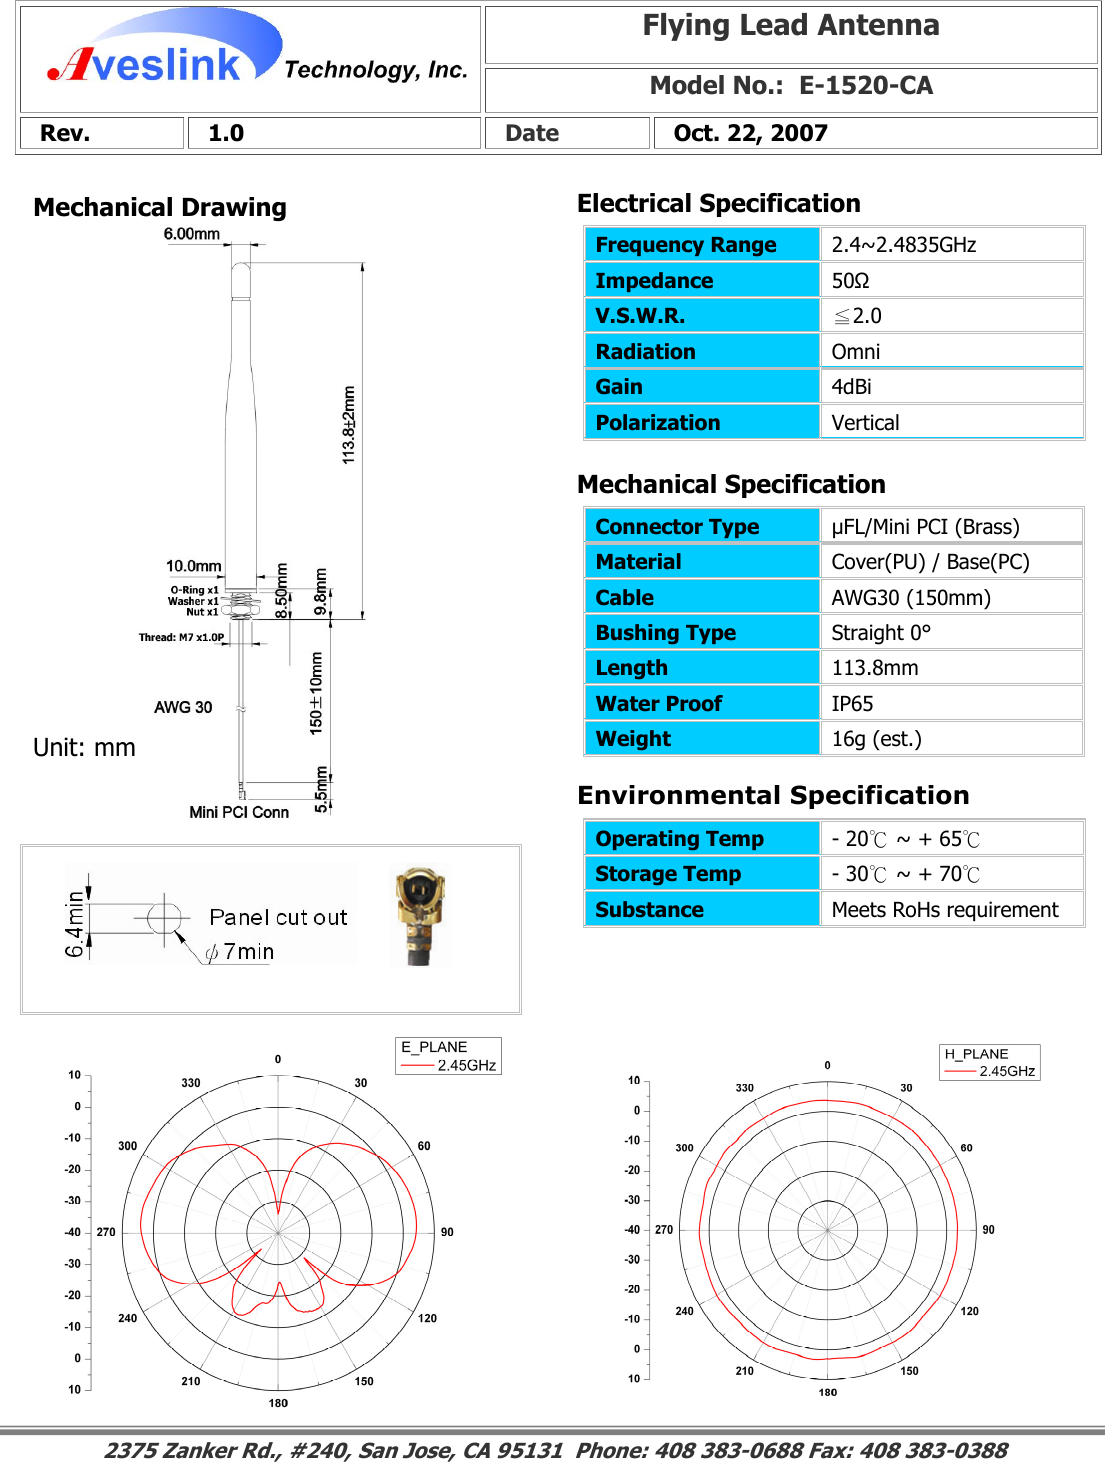 Mechanical DrawingMechanical Specification Environmental SpecificationFlying Lead Antenna Model No.:  E-1520-CA  Rev.   1.0   Date   Oct. 22, 2007 Connector Type   µFL/Mini PCI (Brass) Material  Cover(PU) / Base(PC) Cable  AWG30 (150mm) Bushing Type  Straight 0° Length  113.8mm Water Proof  IP65 Weight  16g (est.)                                                                                                                                                                                                                        2375 Zanker Rd., #240, San Jose, CA 95131  Phone: 408 383-0688 Fax: 408 383-0388 Operating Temp  - 20℃ ~ + 65℃ Storage Temp  - 30℃ ~ + 70℃ Substance  Meets RoHs requirement Electrical SpecificationFrequency Range   2.4~2.4835GHz Impedance  50Ω V.S.W.R.  ≦2.0 Radiation  Omni Gain  4dBi Polarization  Vertical Unit: mm 